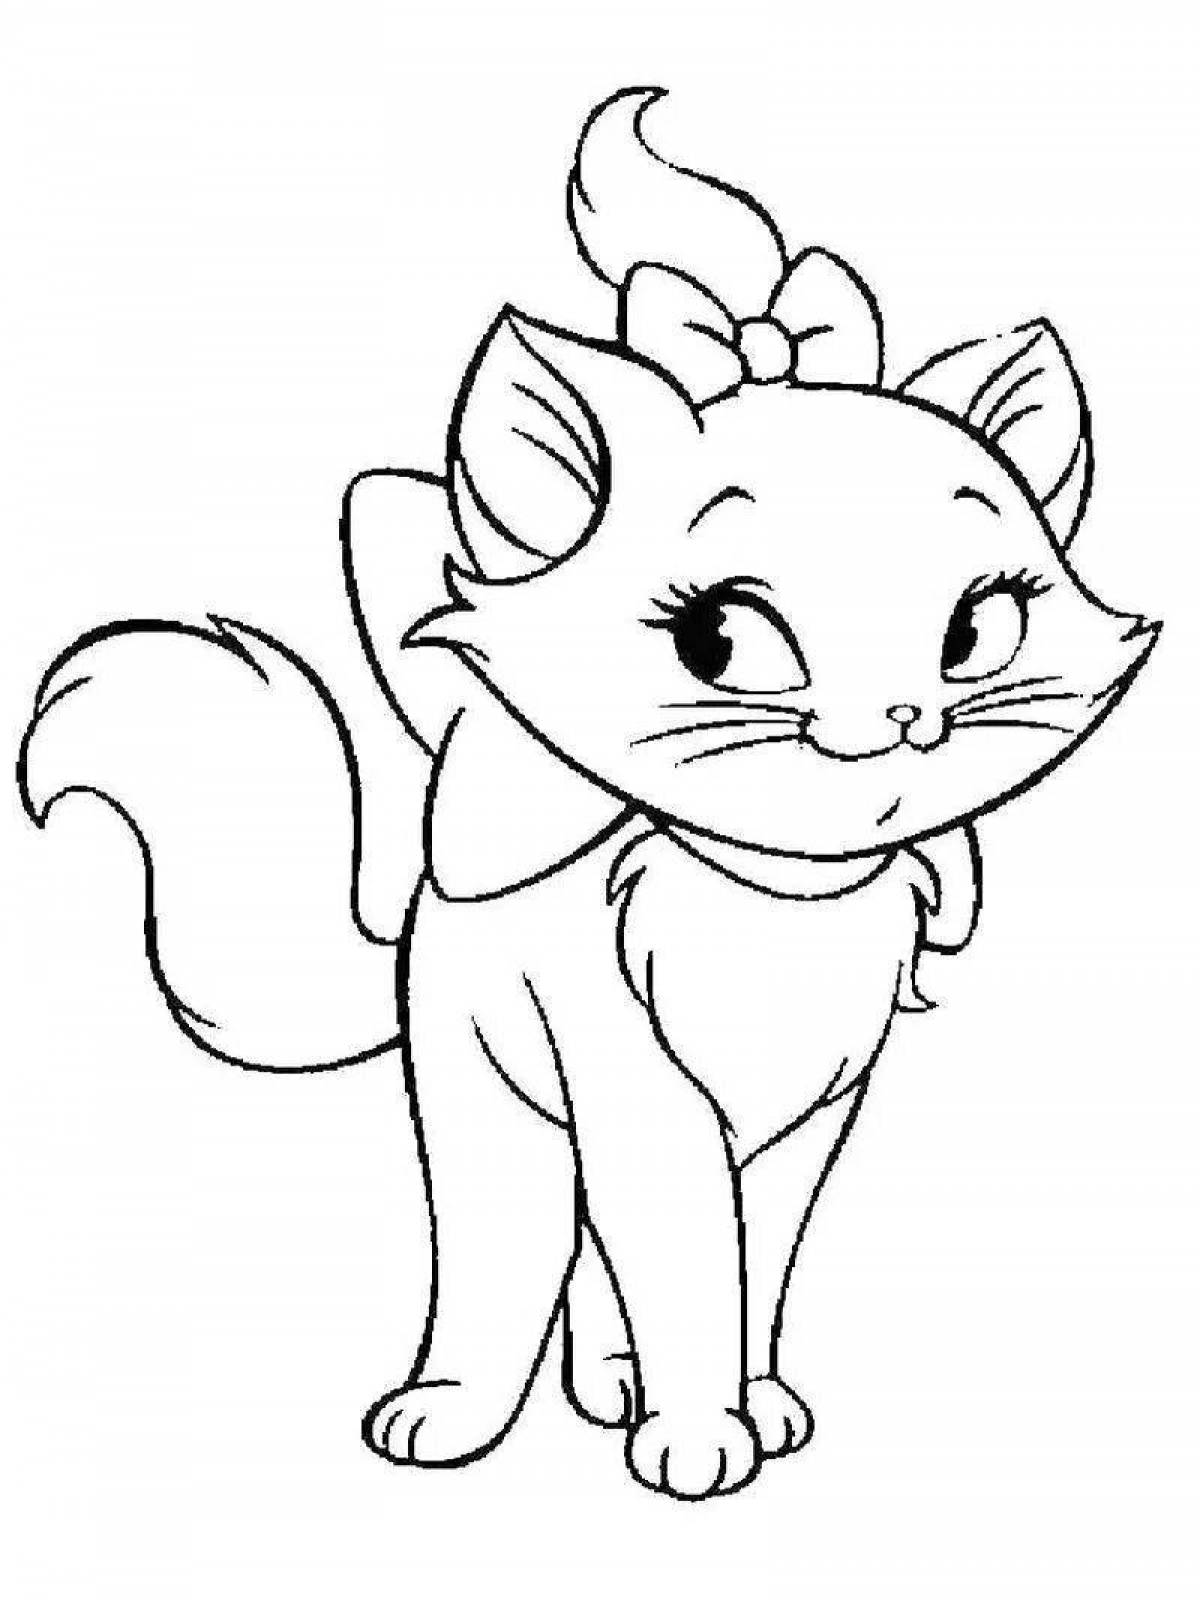 Coloring page adorable kitten with a bow